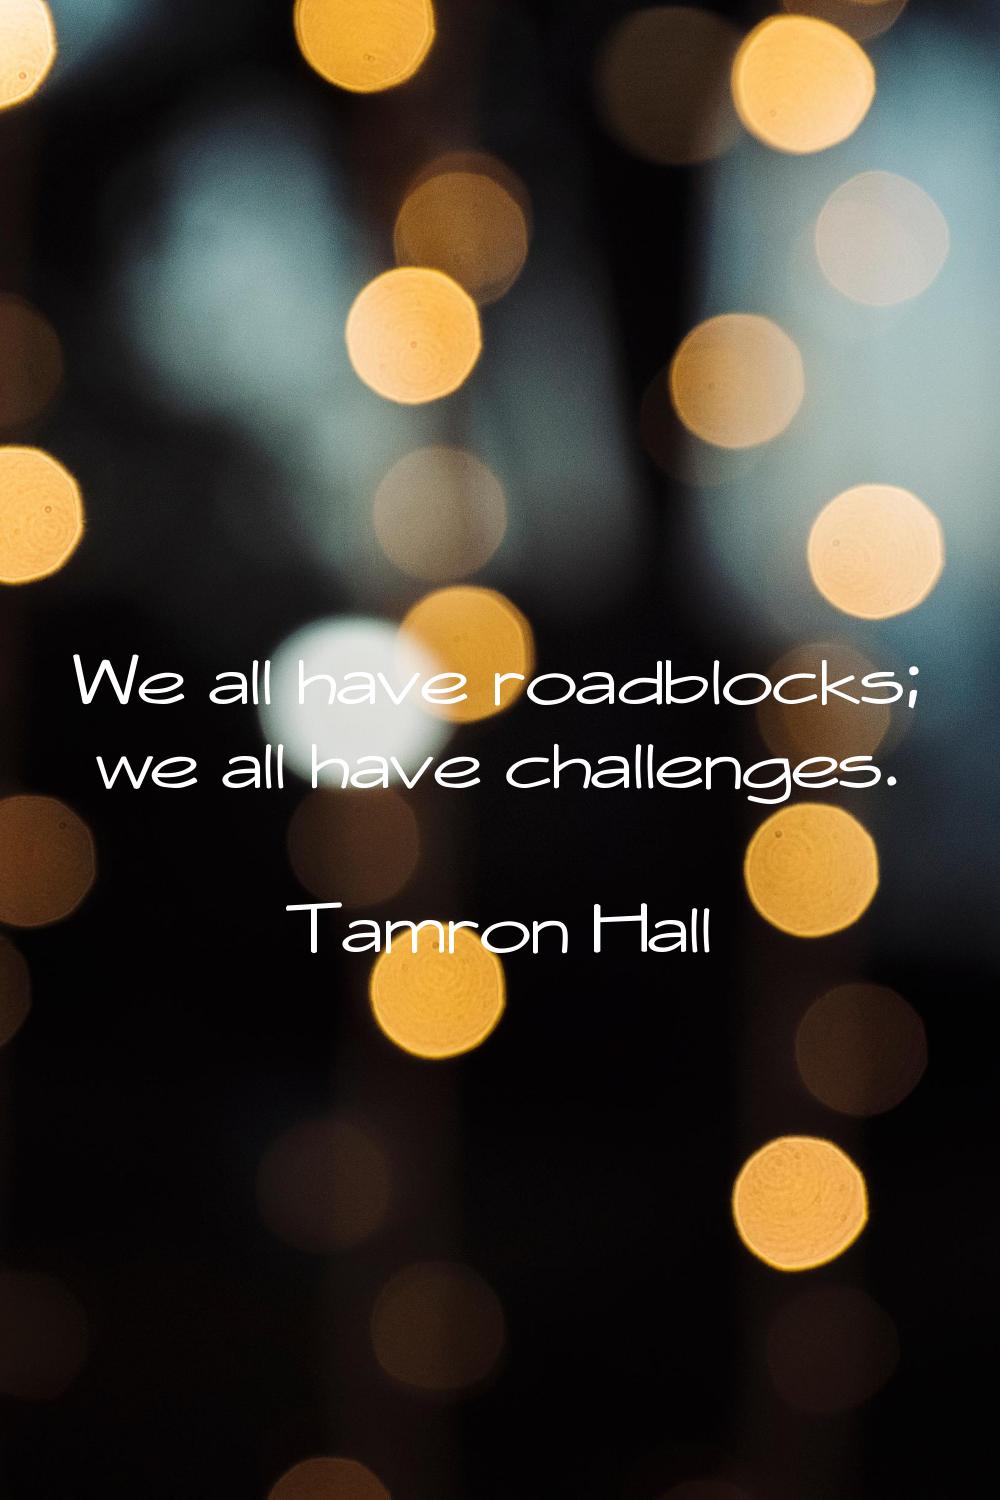 We all have roadblocks; we all have challenges.